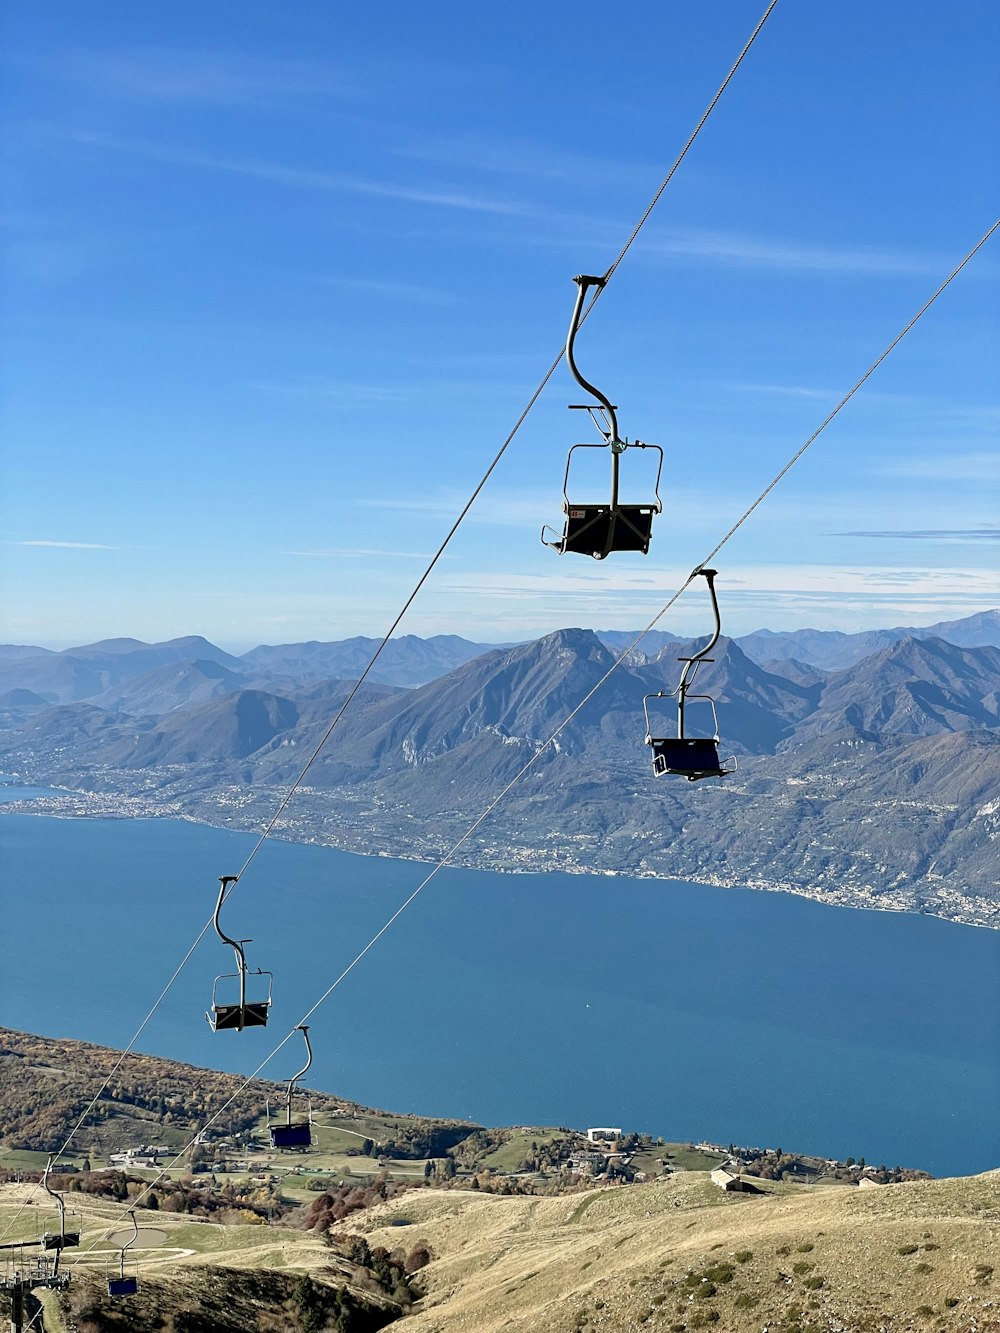 a couple of gondolas hanging from a wire above a body of water